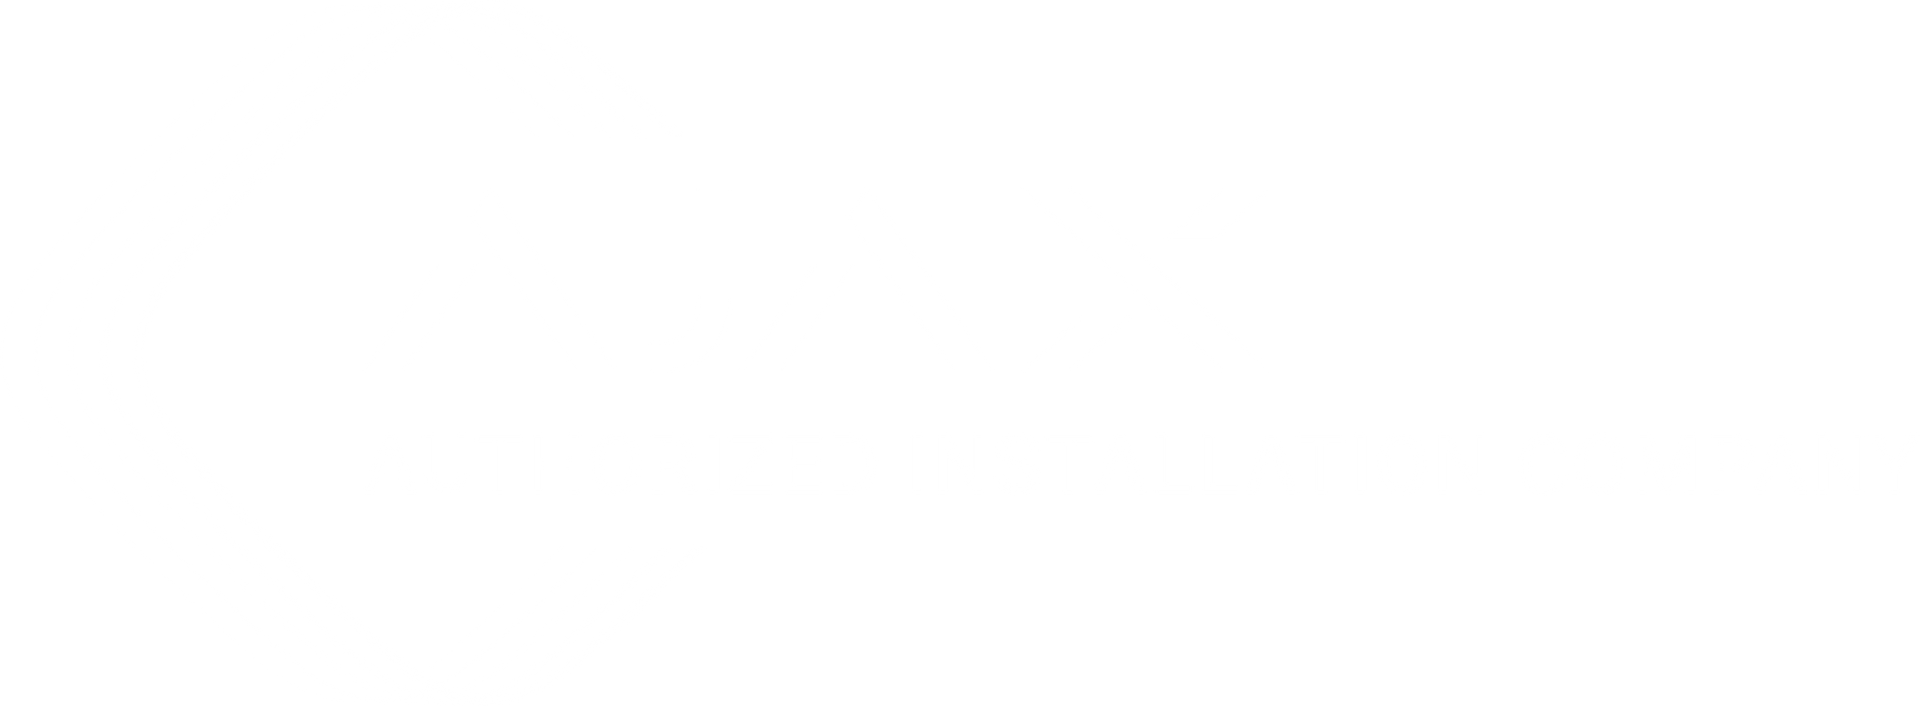 Approved installation company Ajax systems